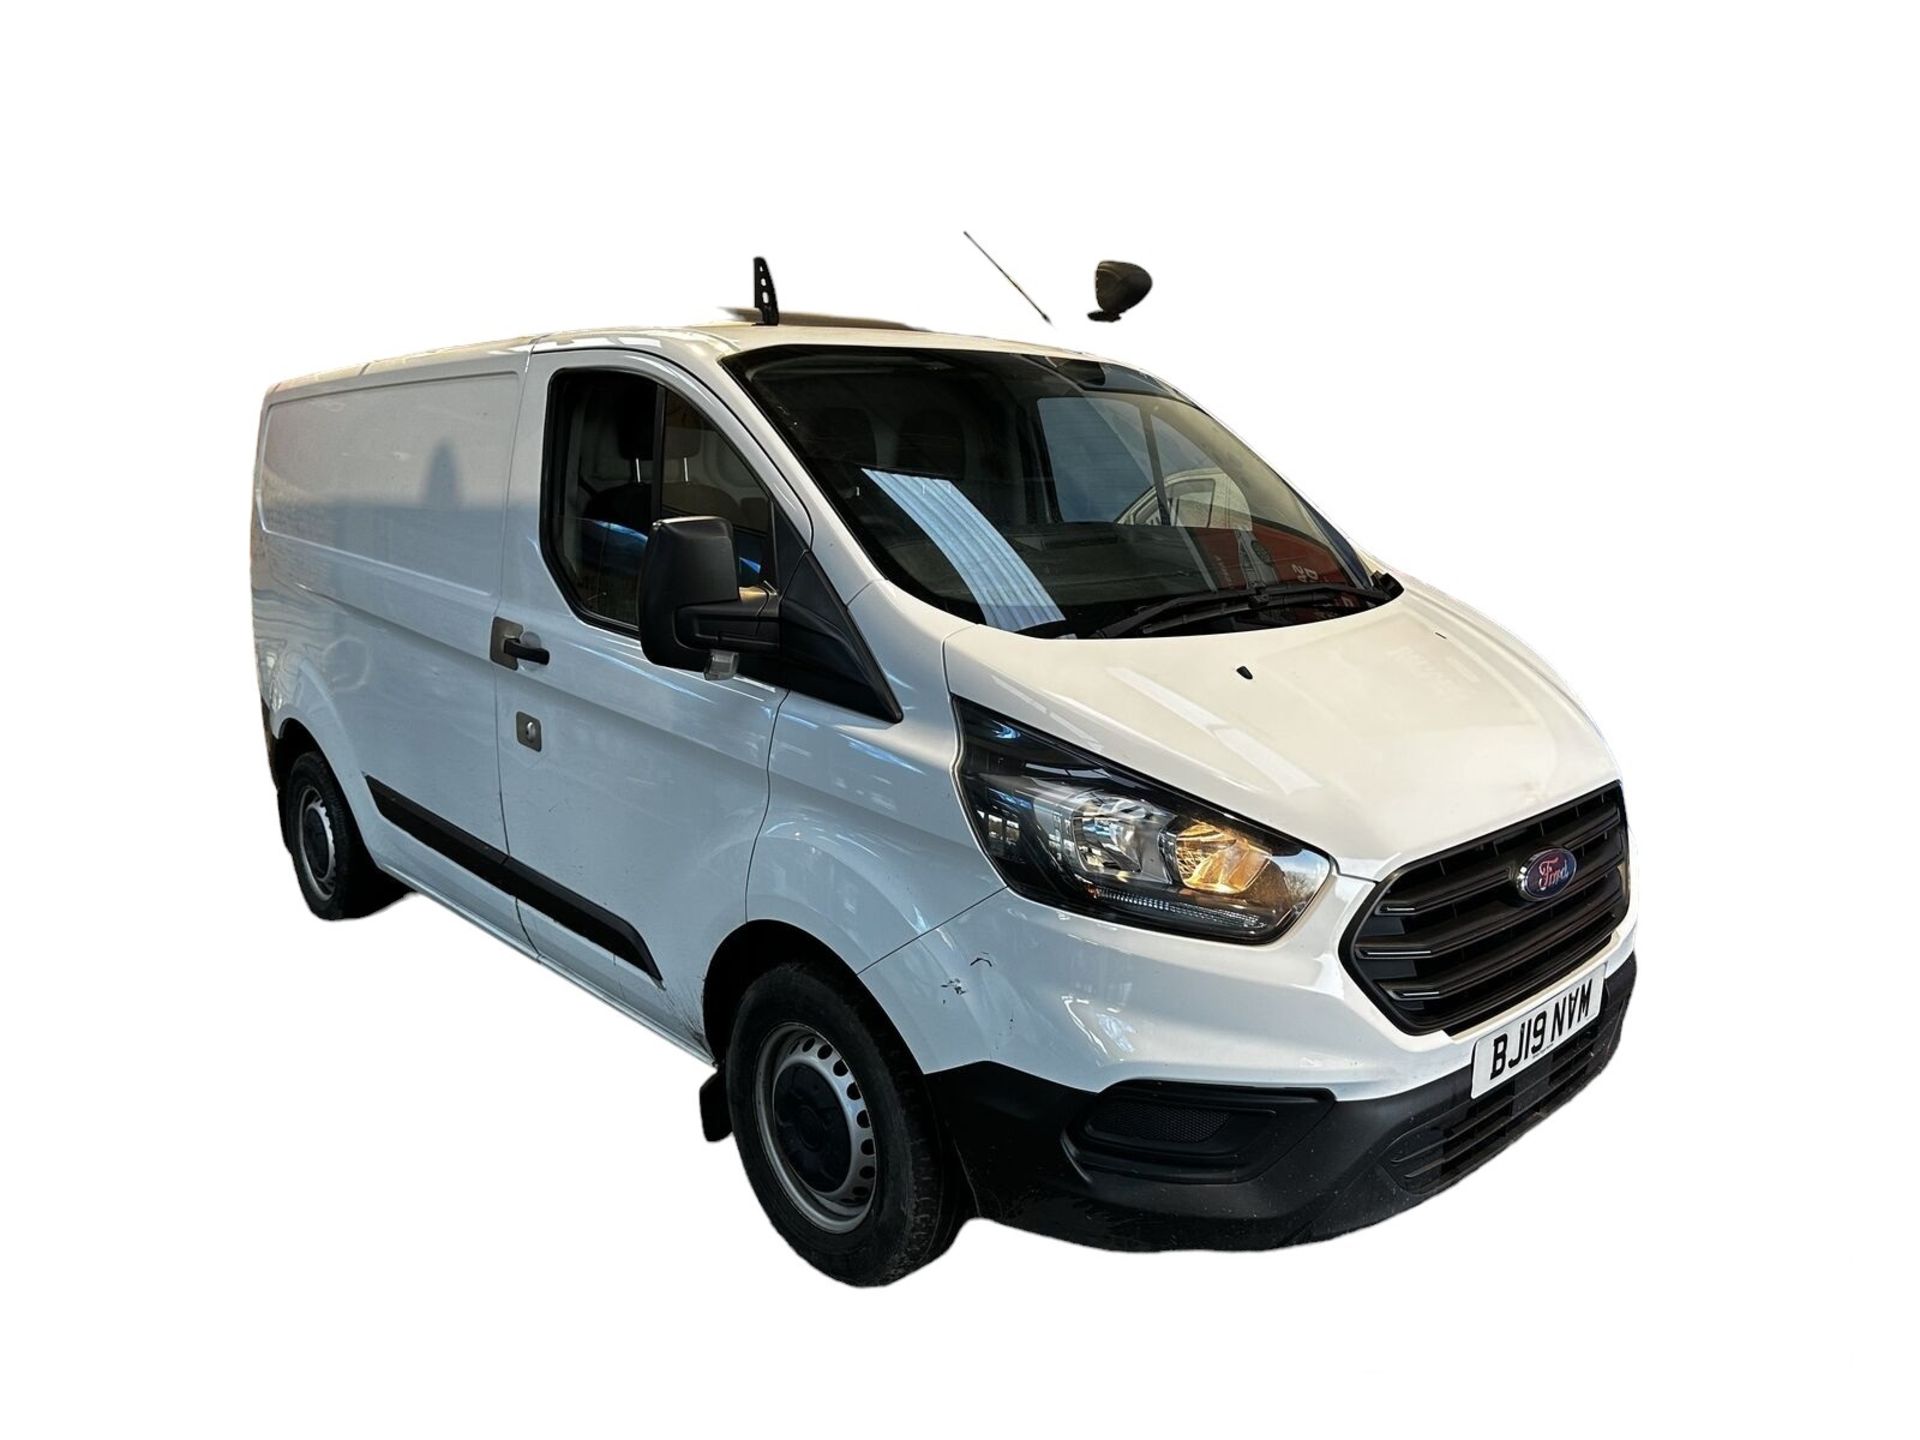 WHITE RHINO: 2019 FORD TRANSIT CUSTOM 300 - CLEAN, RELIABLE WORKHORSE - Image 7 of 12